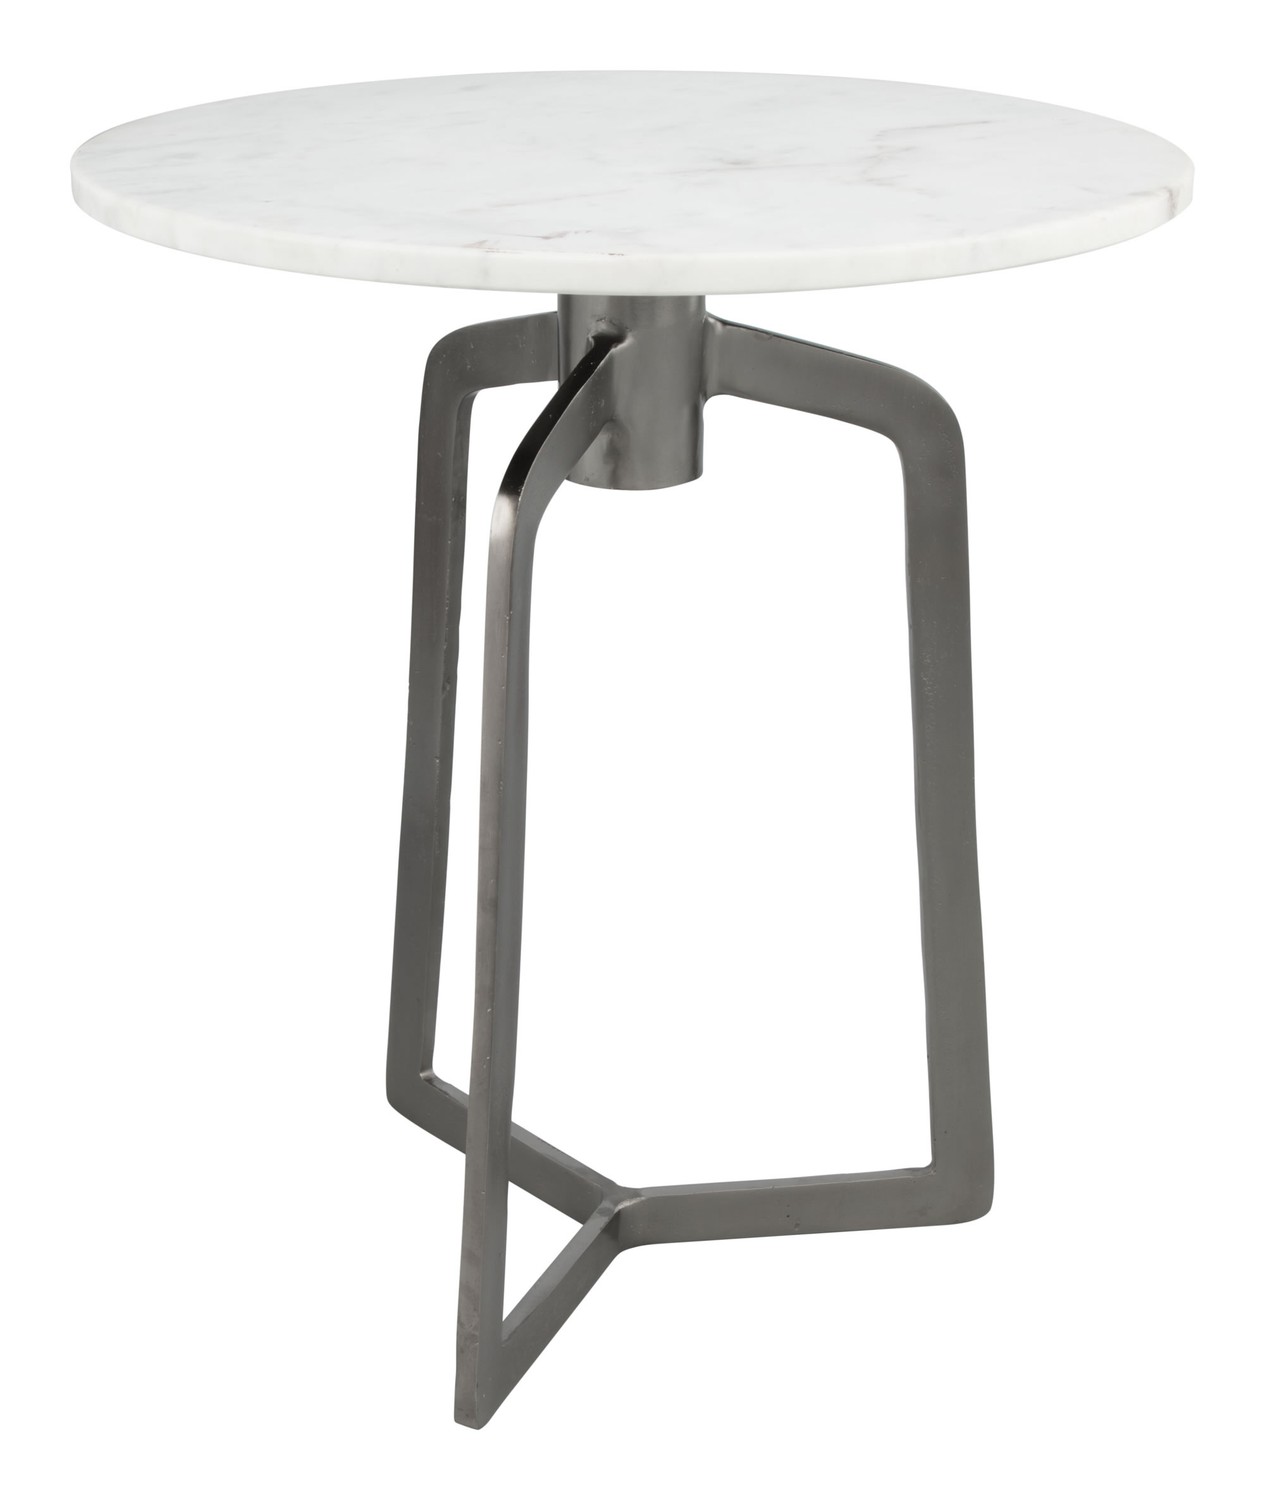 18" x 18" x 21" White Marble and Black Marble Aluminium Side Table